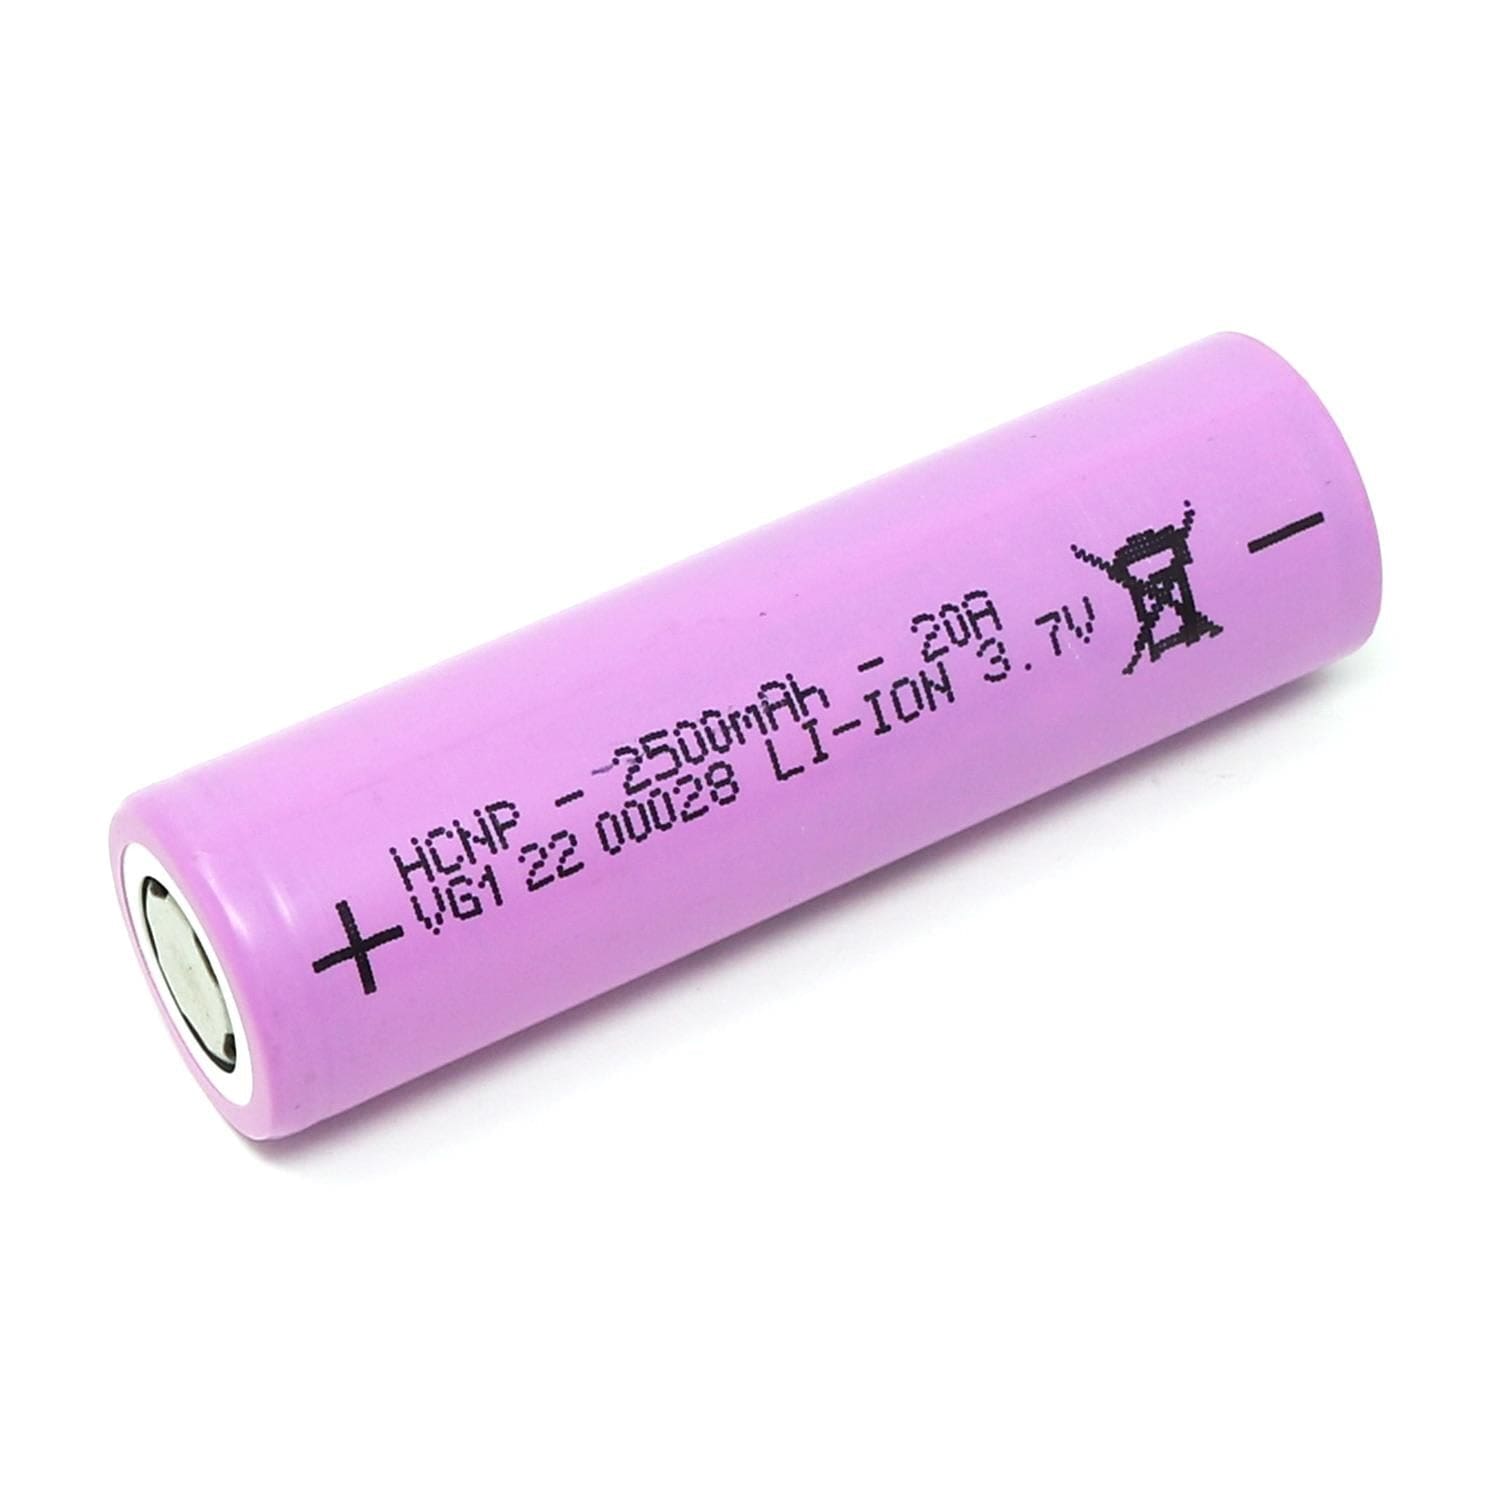 18650 Lithium-ion Rechargeable Cell (2500mAh 3.7V) - The Pi Hut